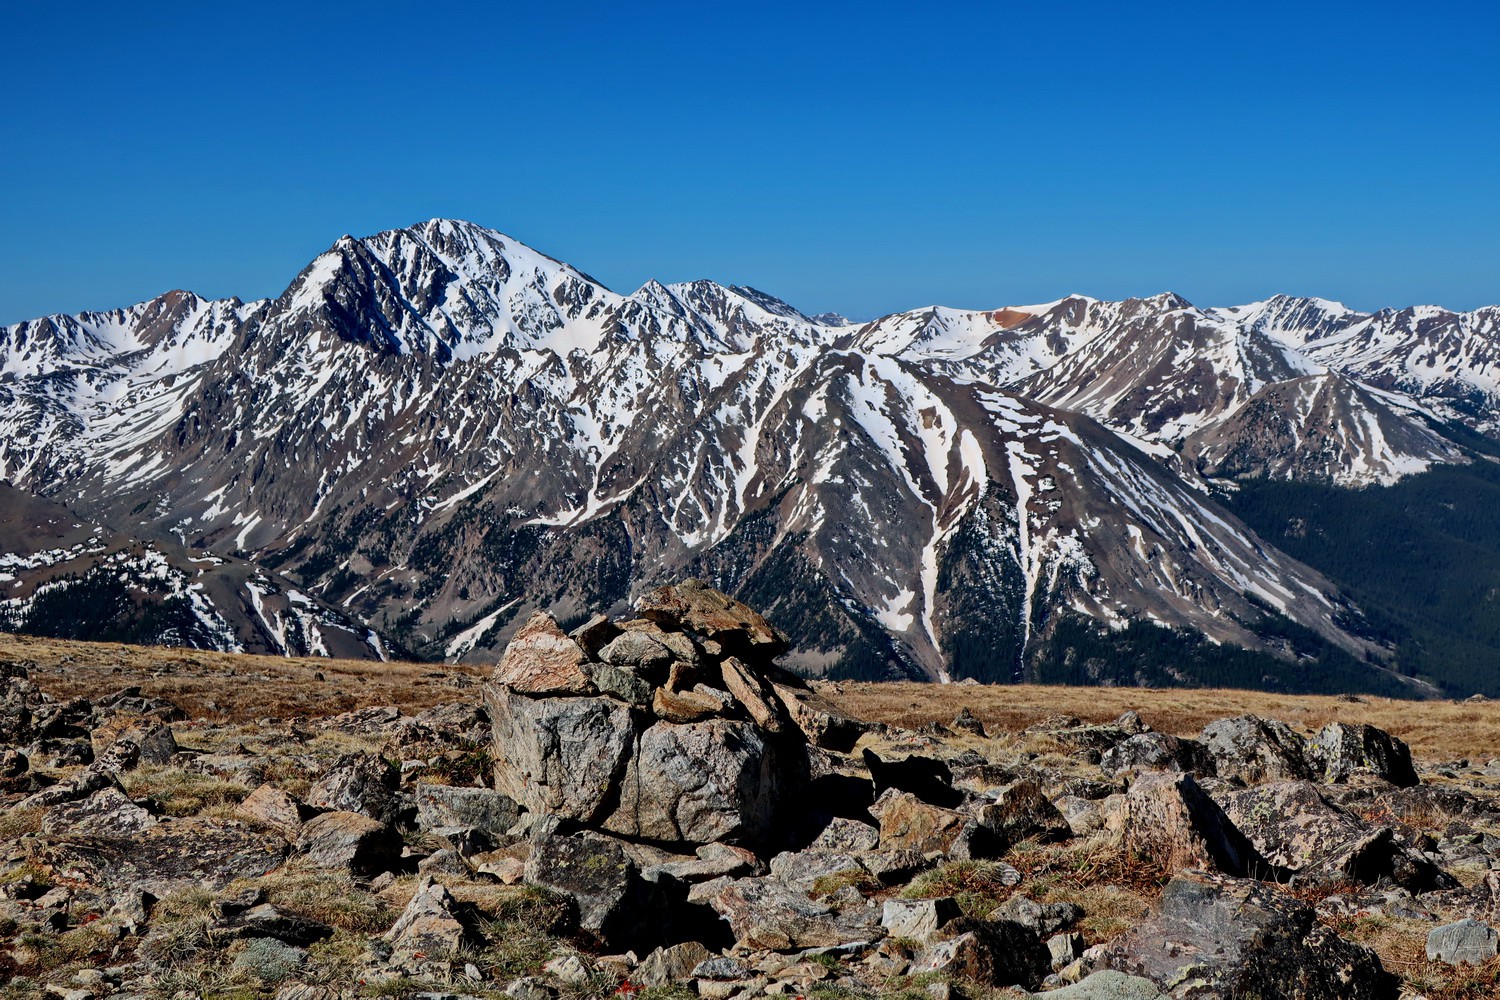 La Plata Peak seen from the saddle between Elbert South and Mount Cosgriff